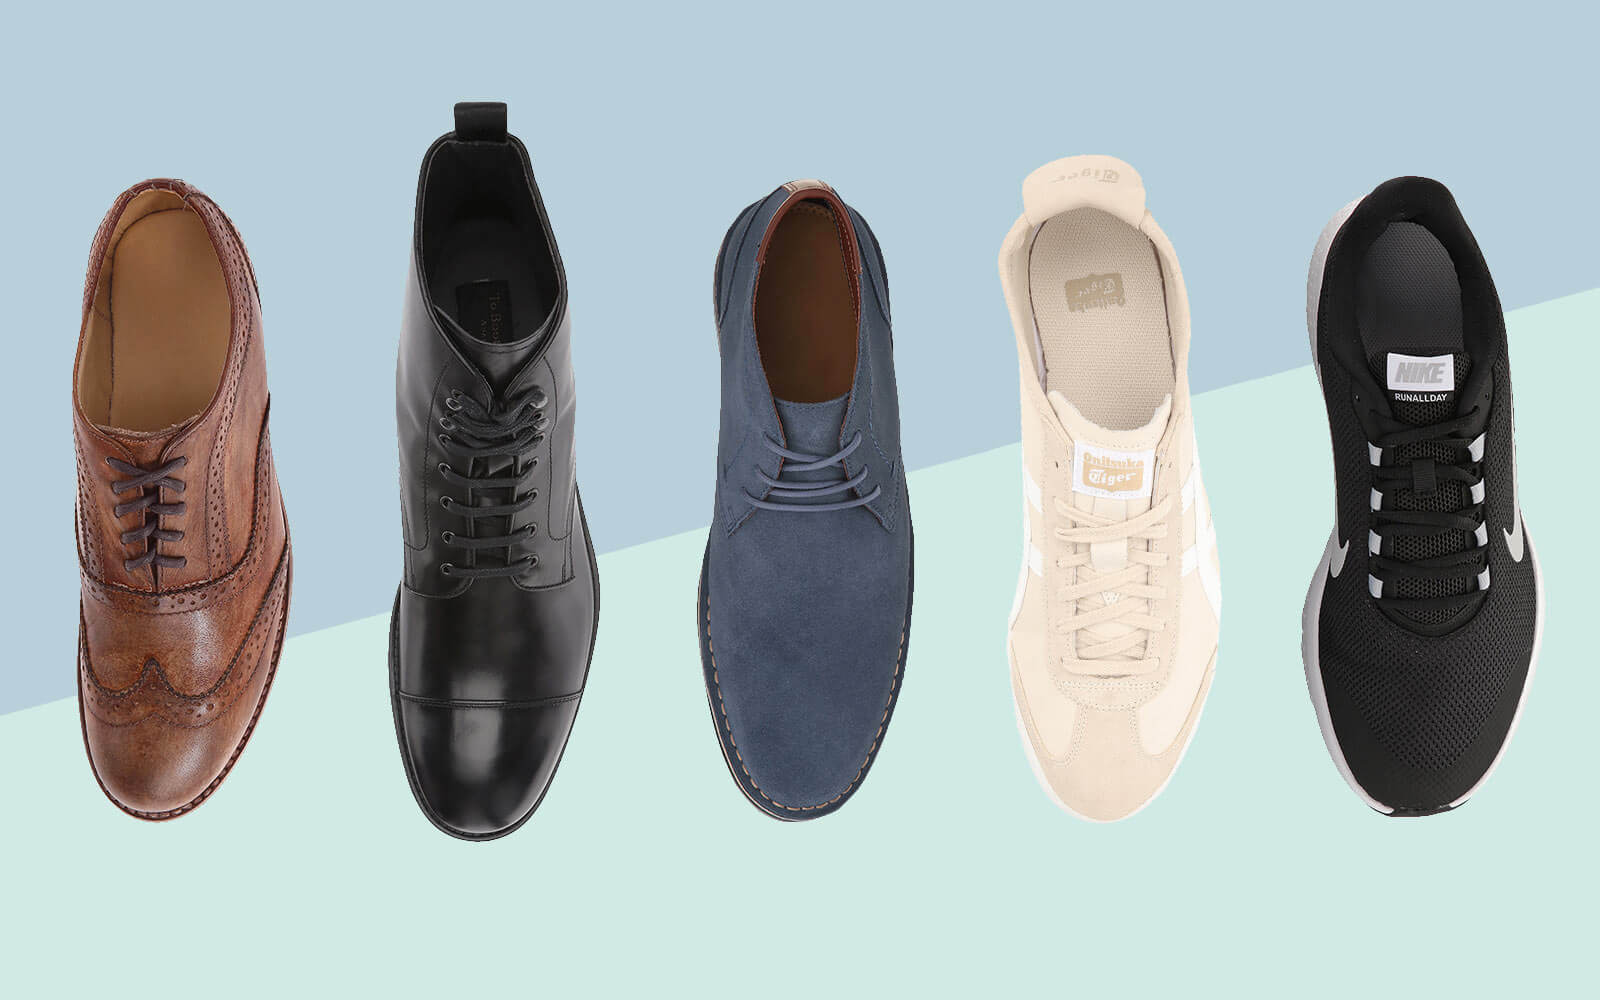 Wardrobe Checklist: 3 Shoes Every Man Should Own - The GentleManual